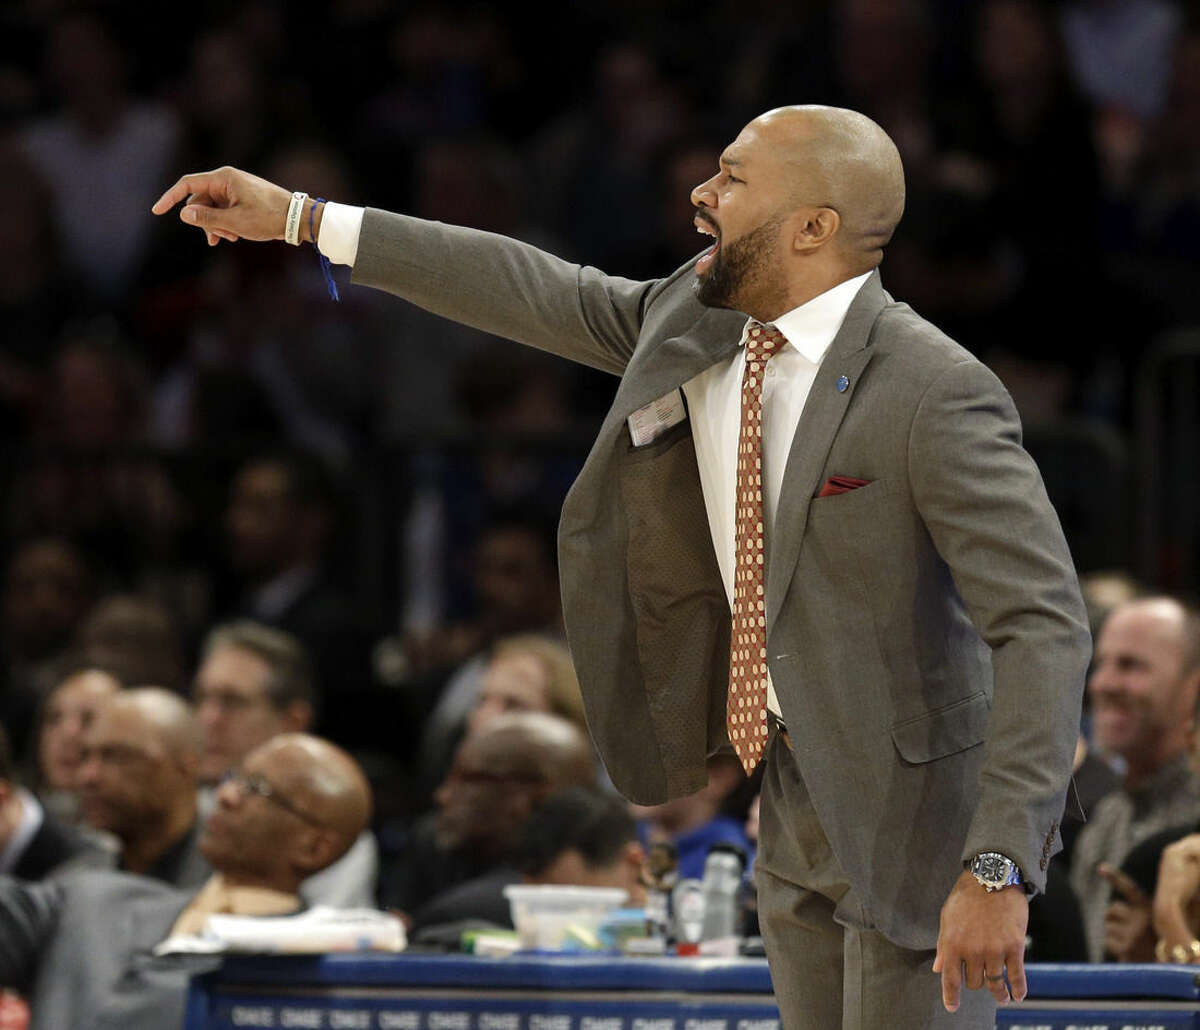 New York Knicks head coach Derek Fisher talks to his players during the second half of the NBA basketball game against the Denver Nuggets, Sunday, Feb. 7, 2016, in New York. The Nuggets defeated the Knicks 101-96. (AP Photo/Seth Wenig)